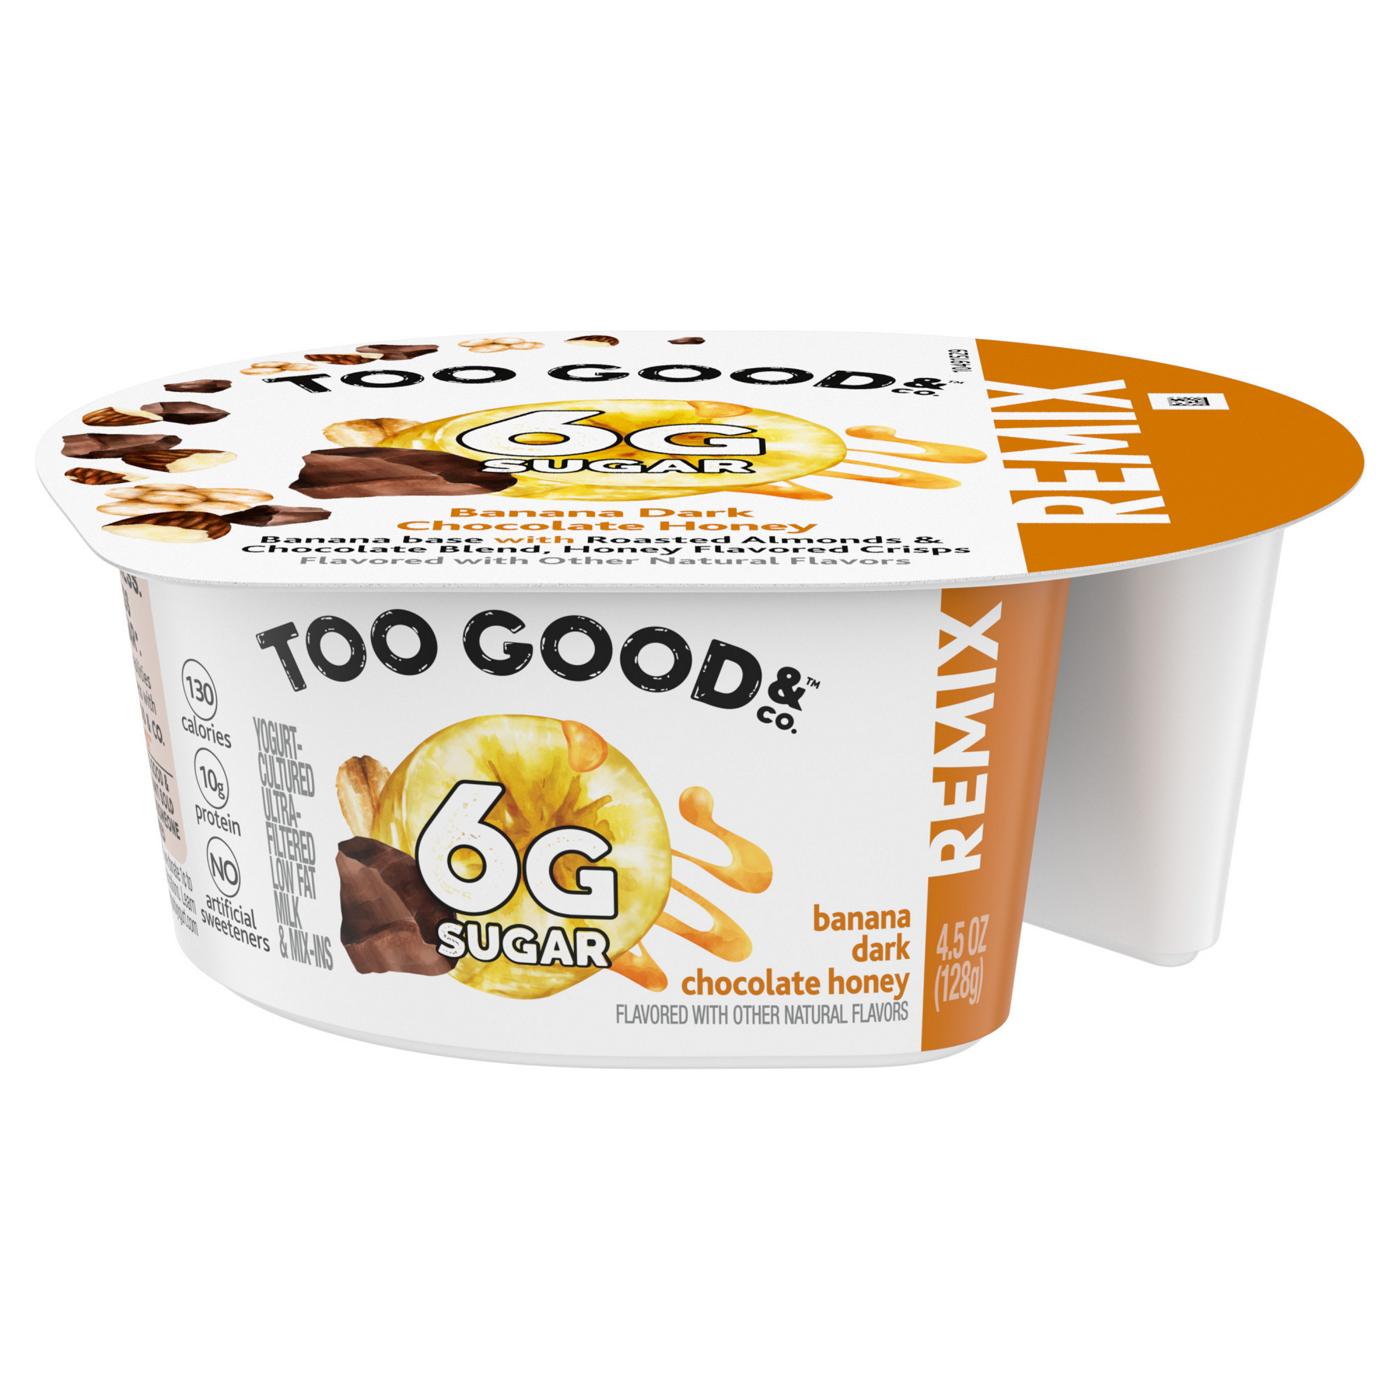 Too Good & Co. Remix Banana Flavored Low Fat Greek Yogurt-Cultured Ultra-Filtered Low Fat; image 2 of 9